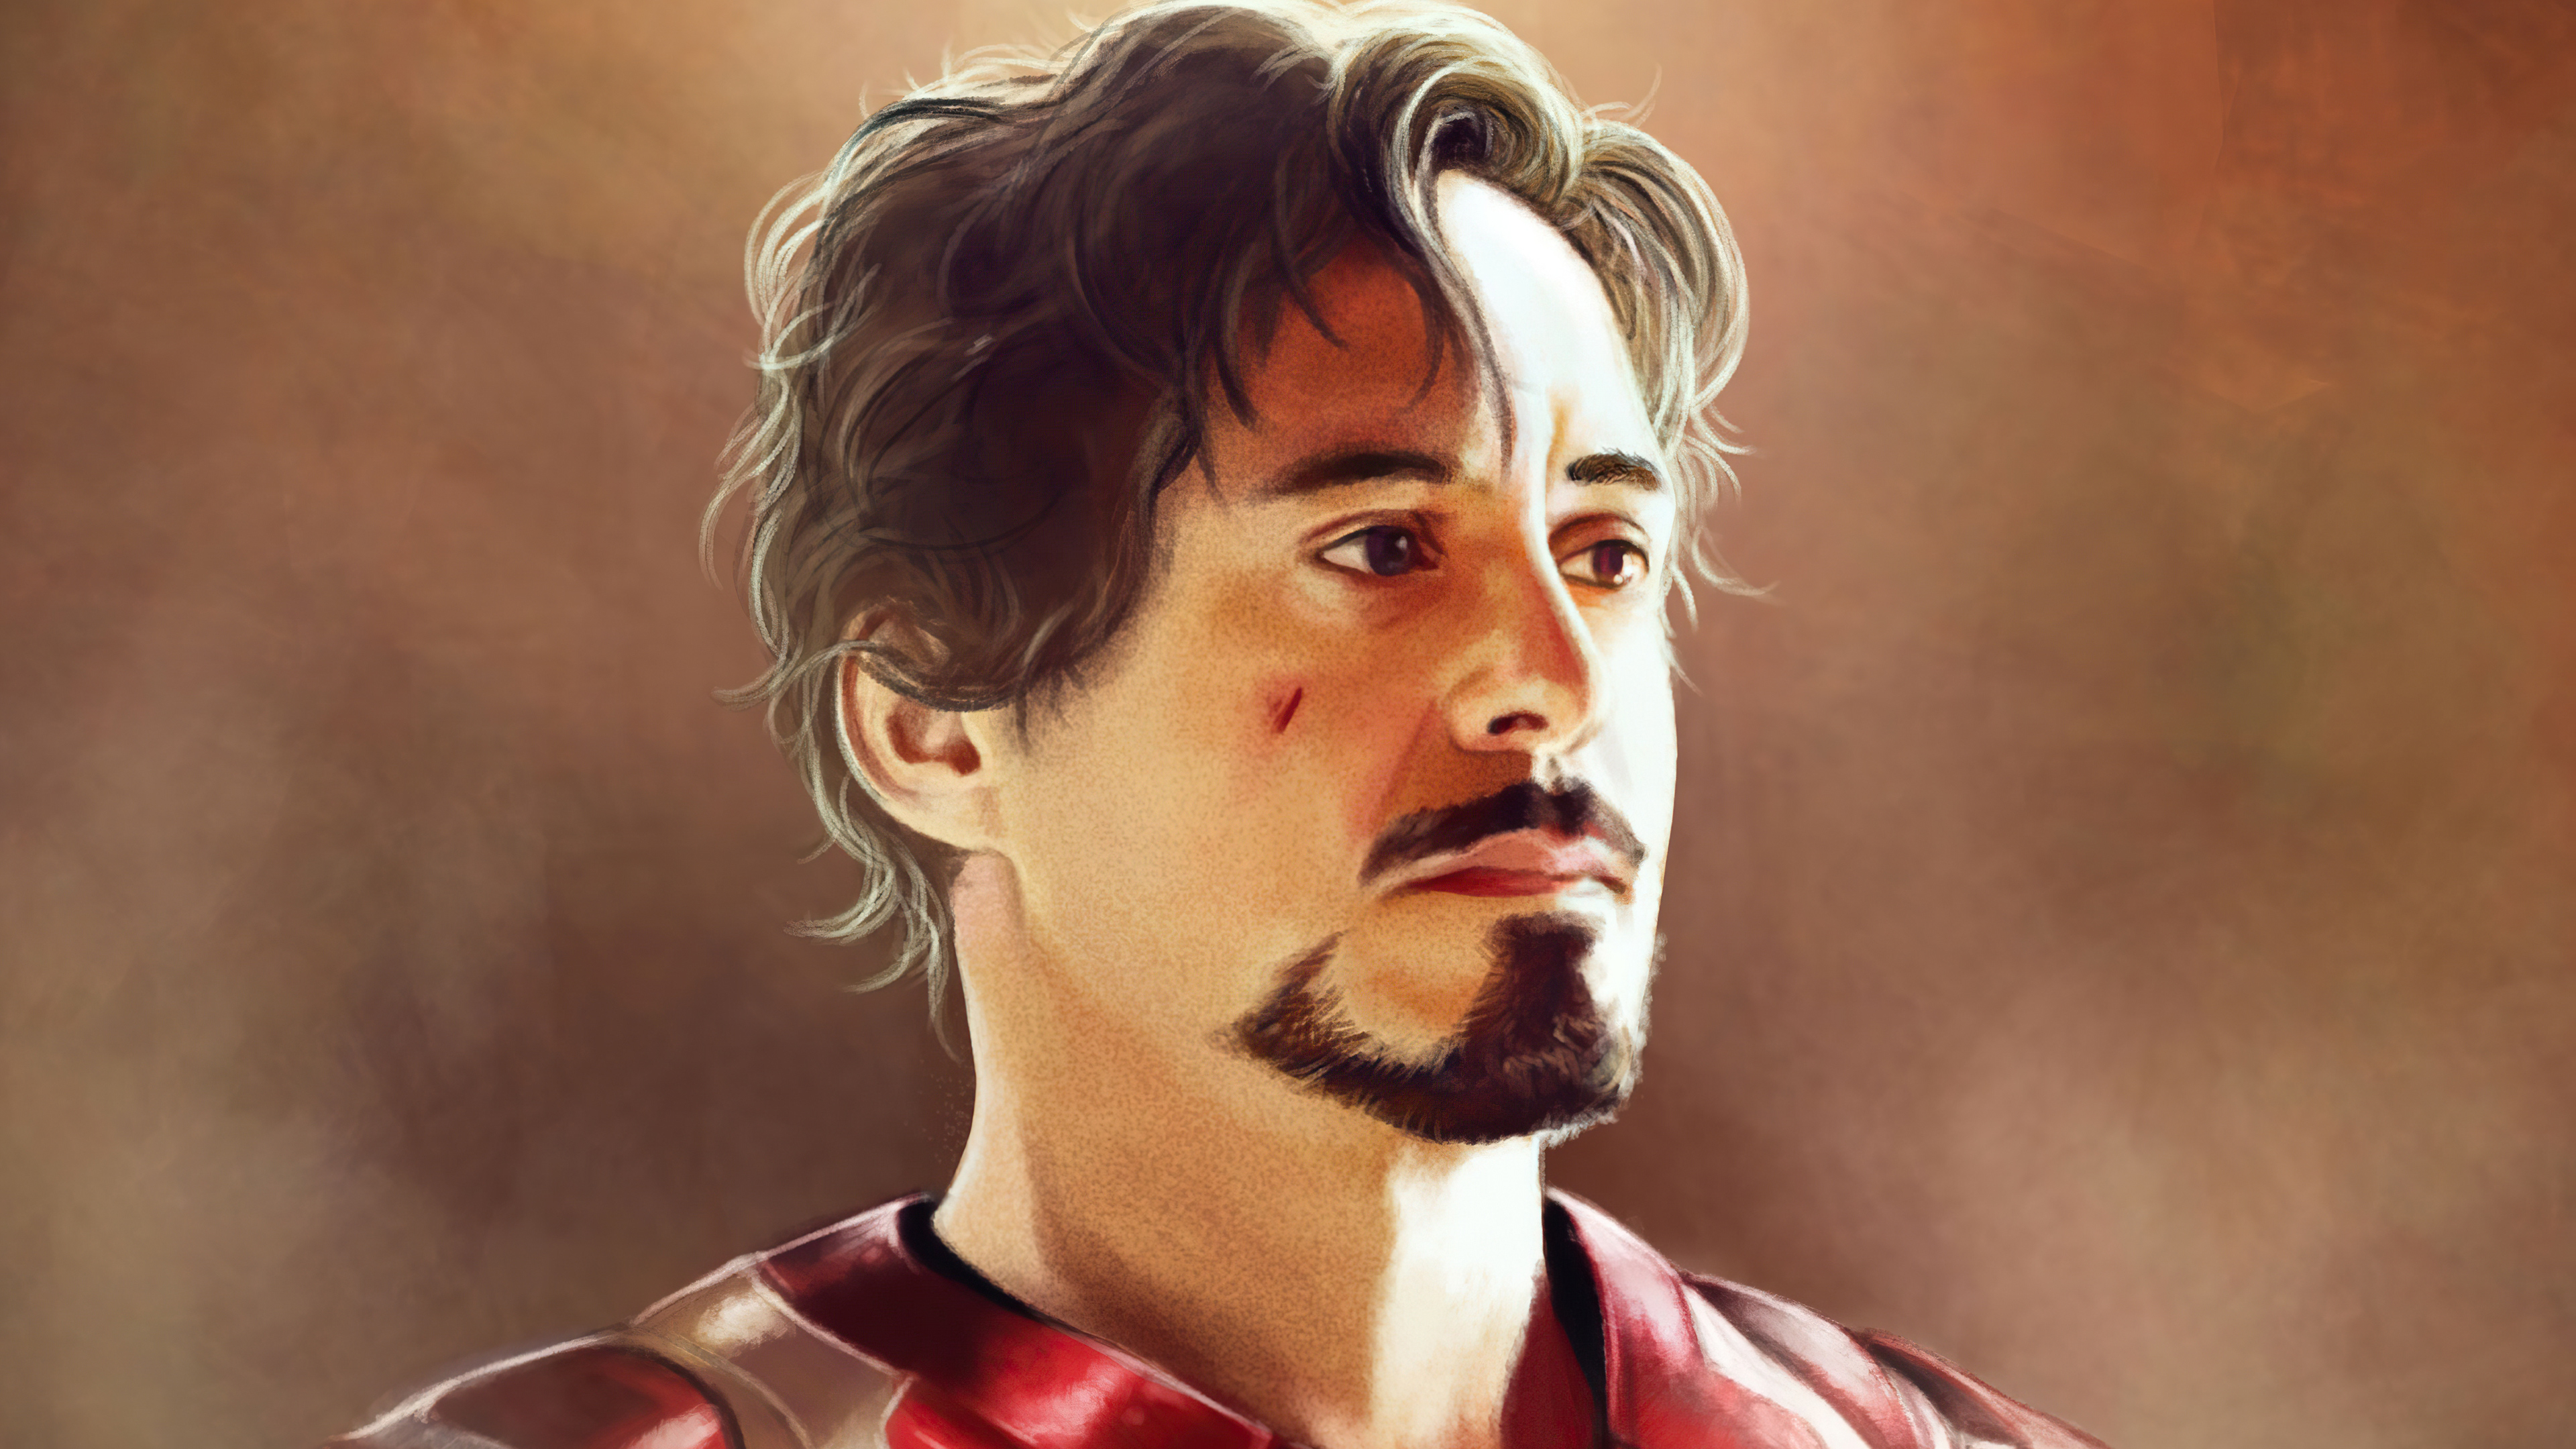 3840x2160 2932x2932 Tony Stark Paint Art Ipad Pro Retina Display HD 4k Wallpapers, Images, Backgrounds, Photos and Pictures